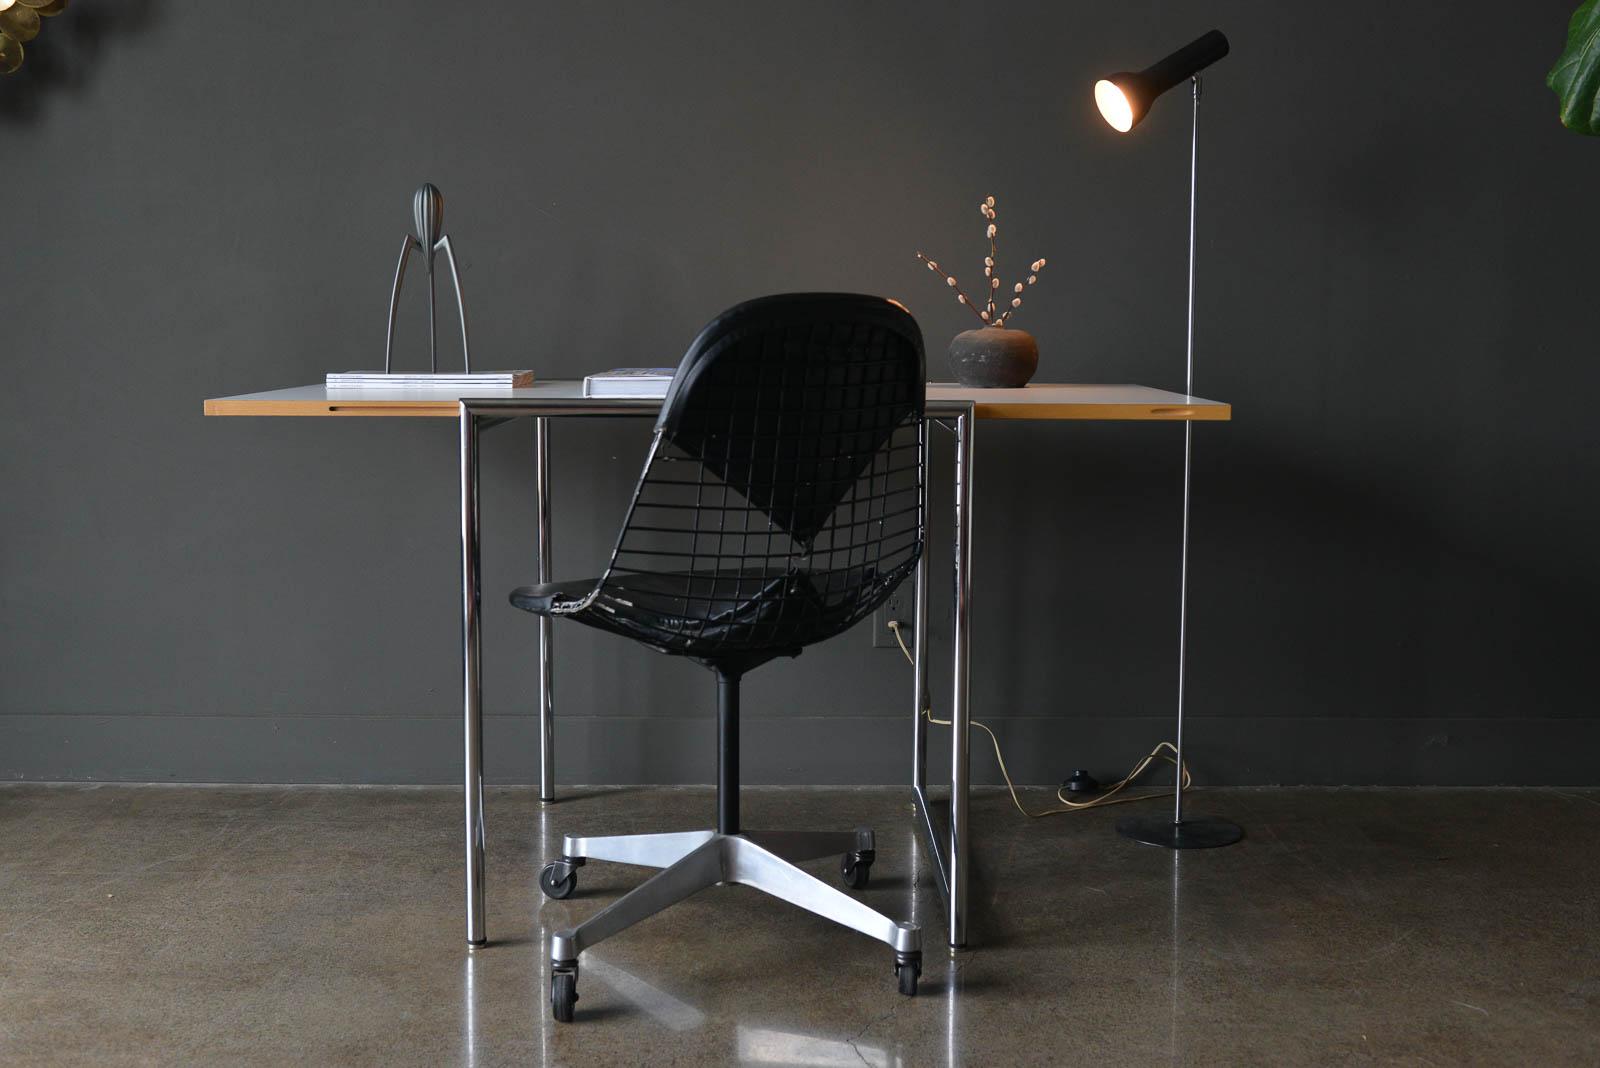 'Jean' folding table or desk by Eileen Gray. Originally designed in 1929, this is a new production model by Classicon. Jean, named after Eileen Gray‘s intimate friend of many years, the architect Jean Badovici, stood in various models in their